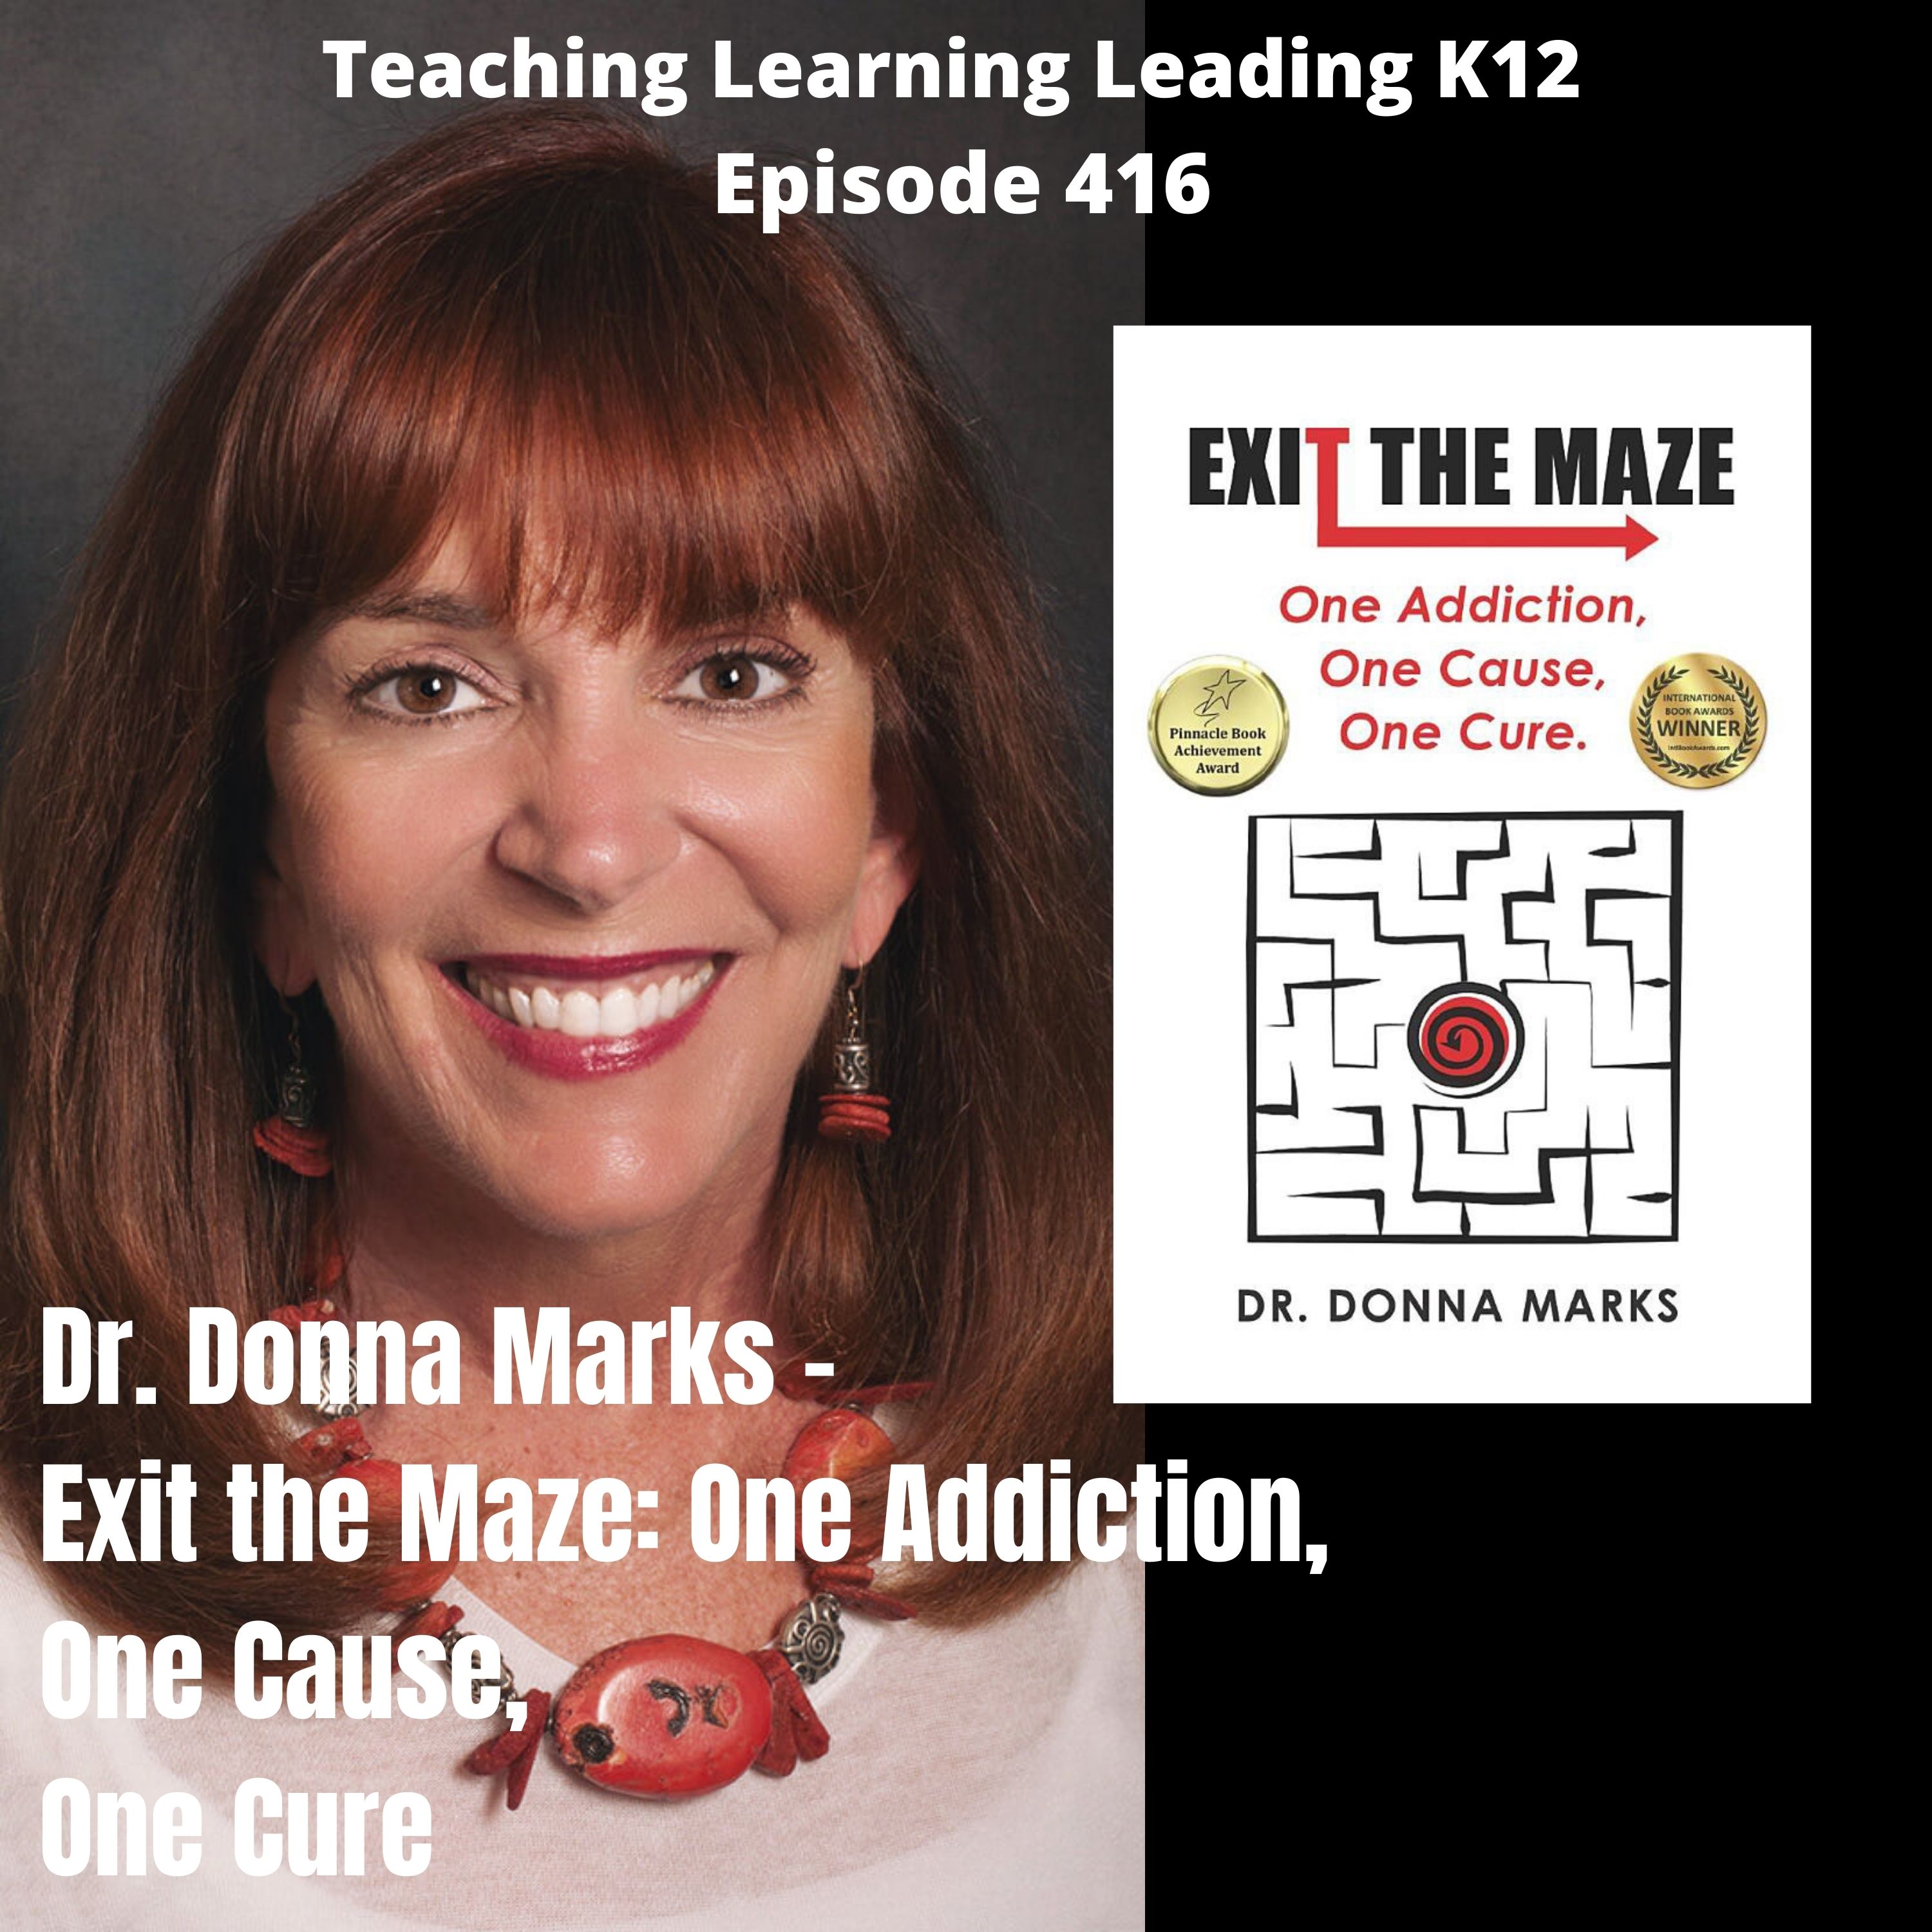 Donna Marks - Exit the Maze: One Addiction, One Cause, One Cure - 416 Image